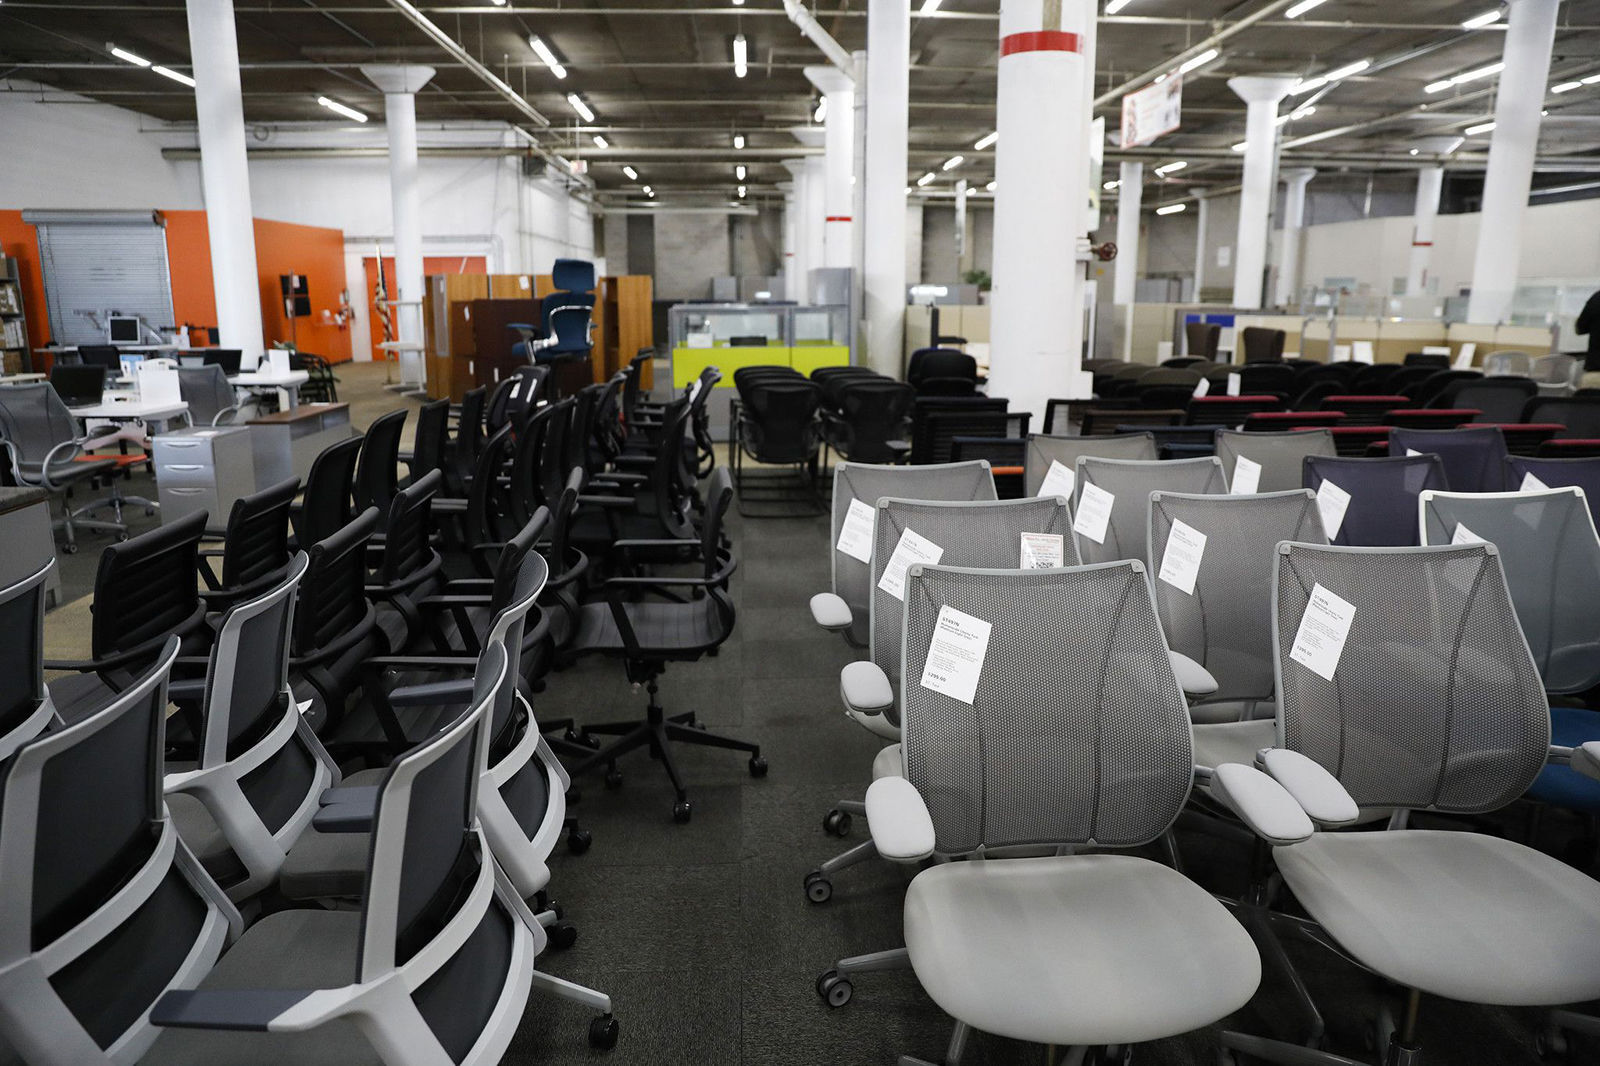 Office chairs at Office Furniture Center in Chicago. PHOTO CREDIT: Tribune News Service